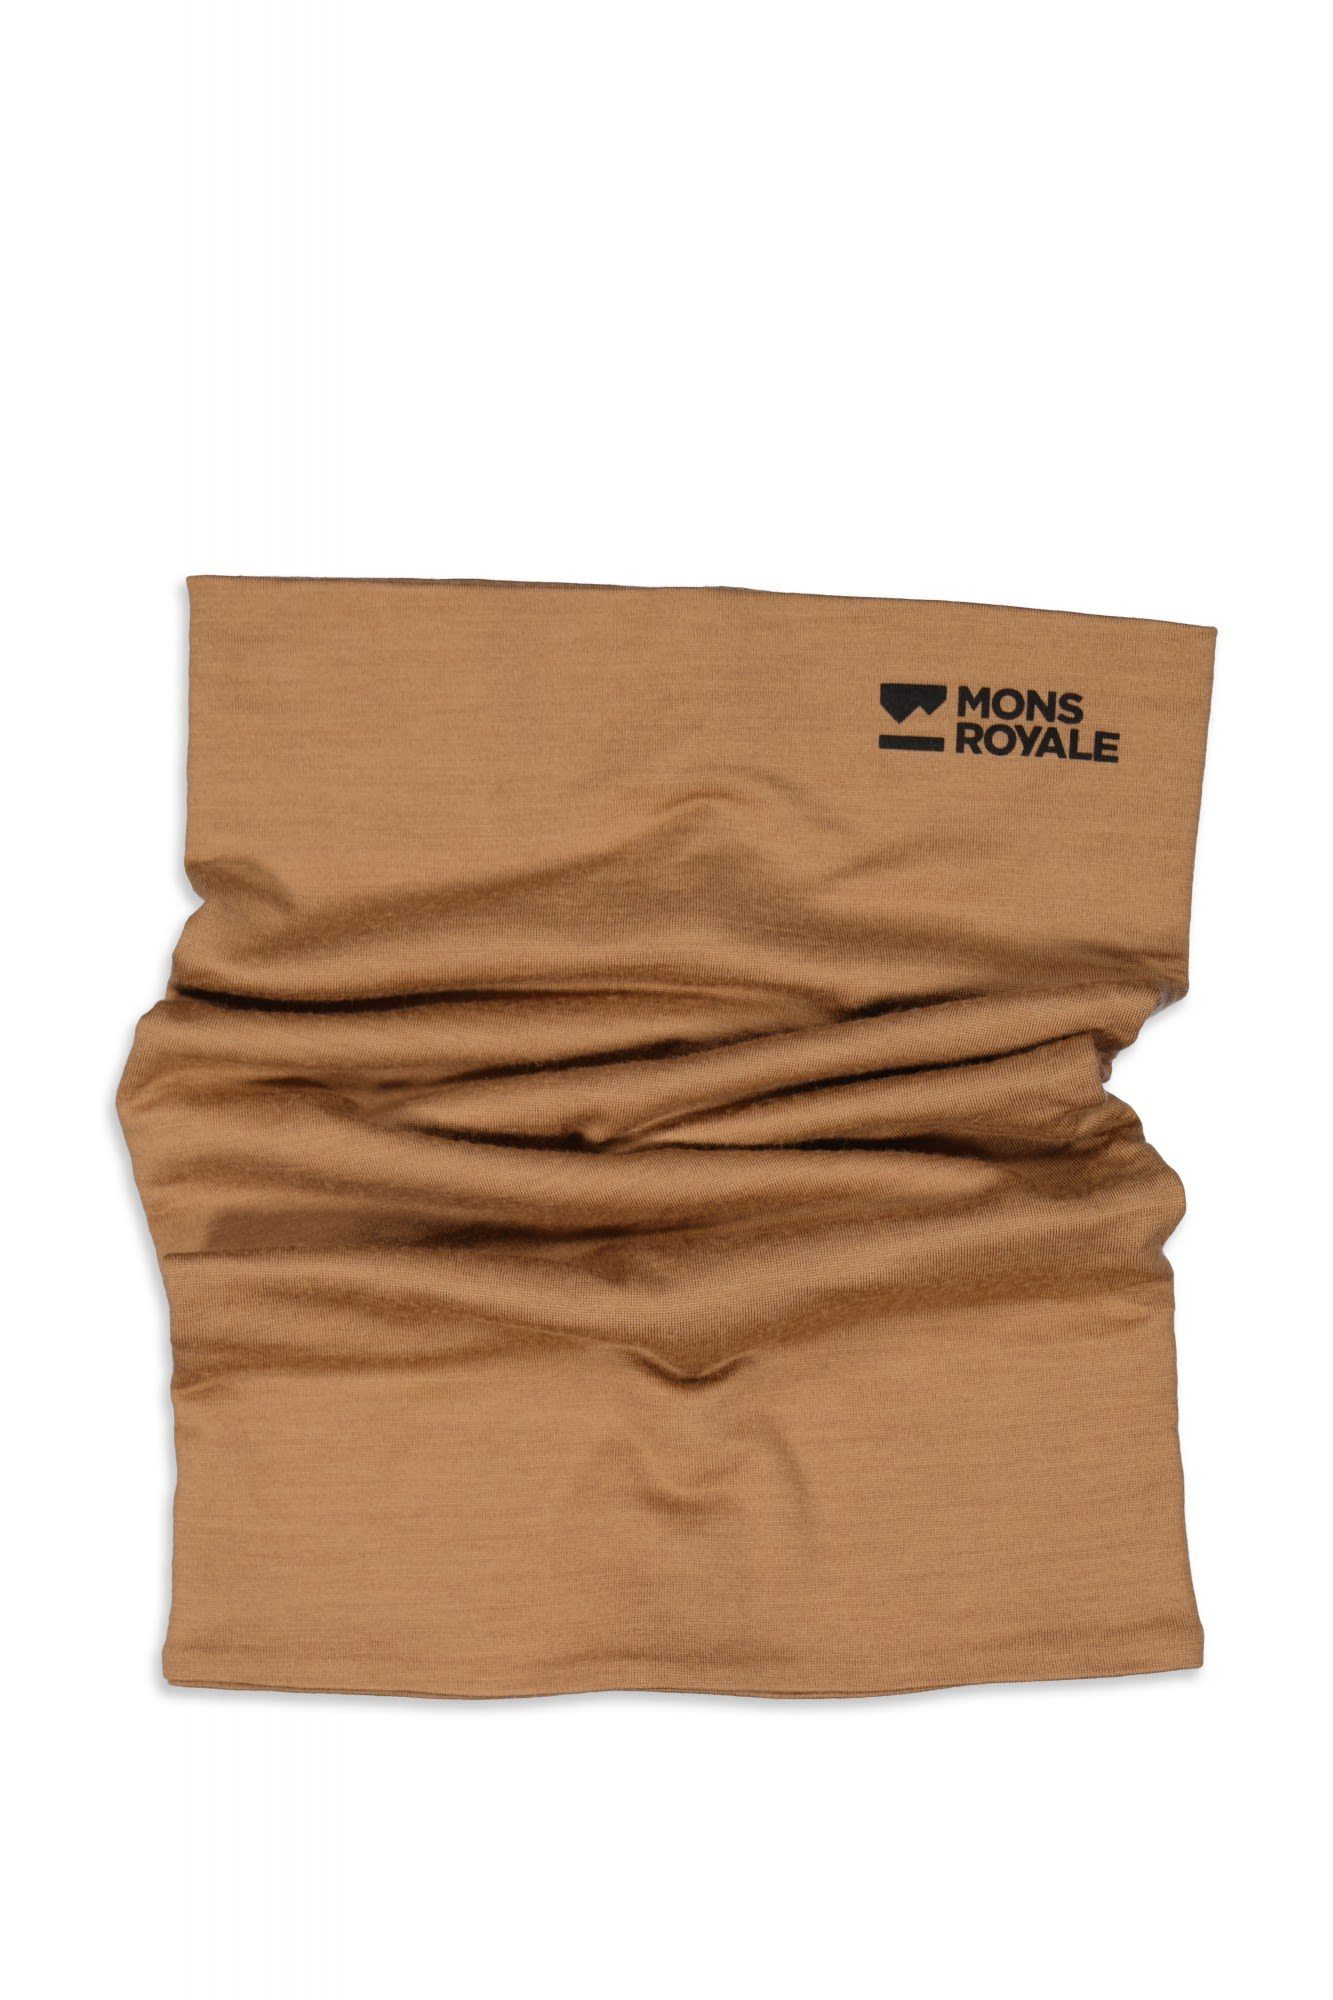 Mons Toffee Royale Double Up Neckwarmer Accessoires Schal Royale Mons